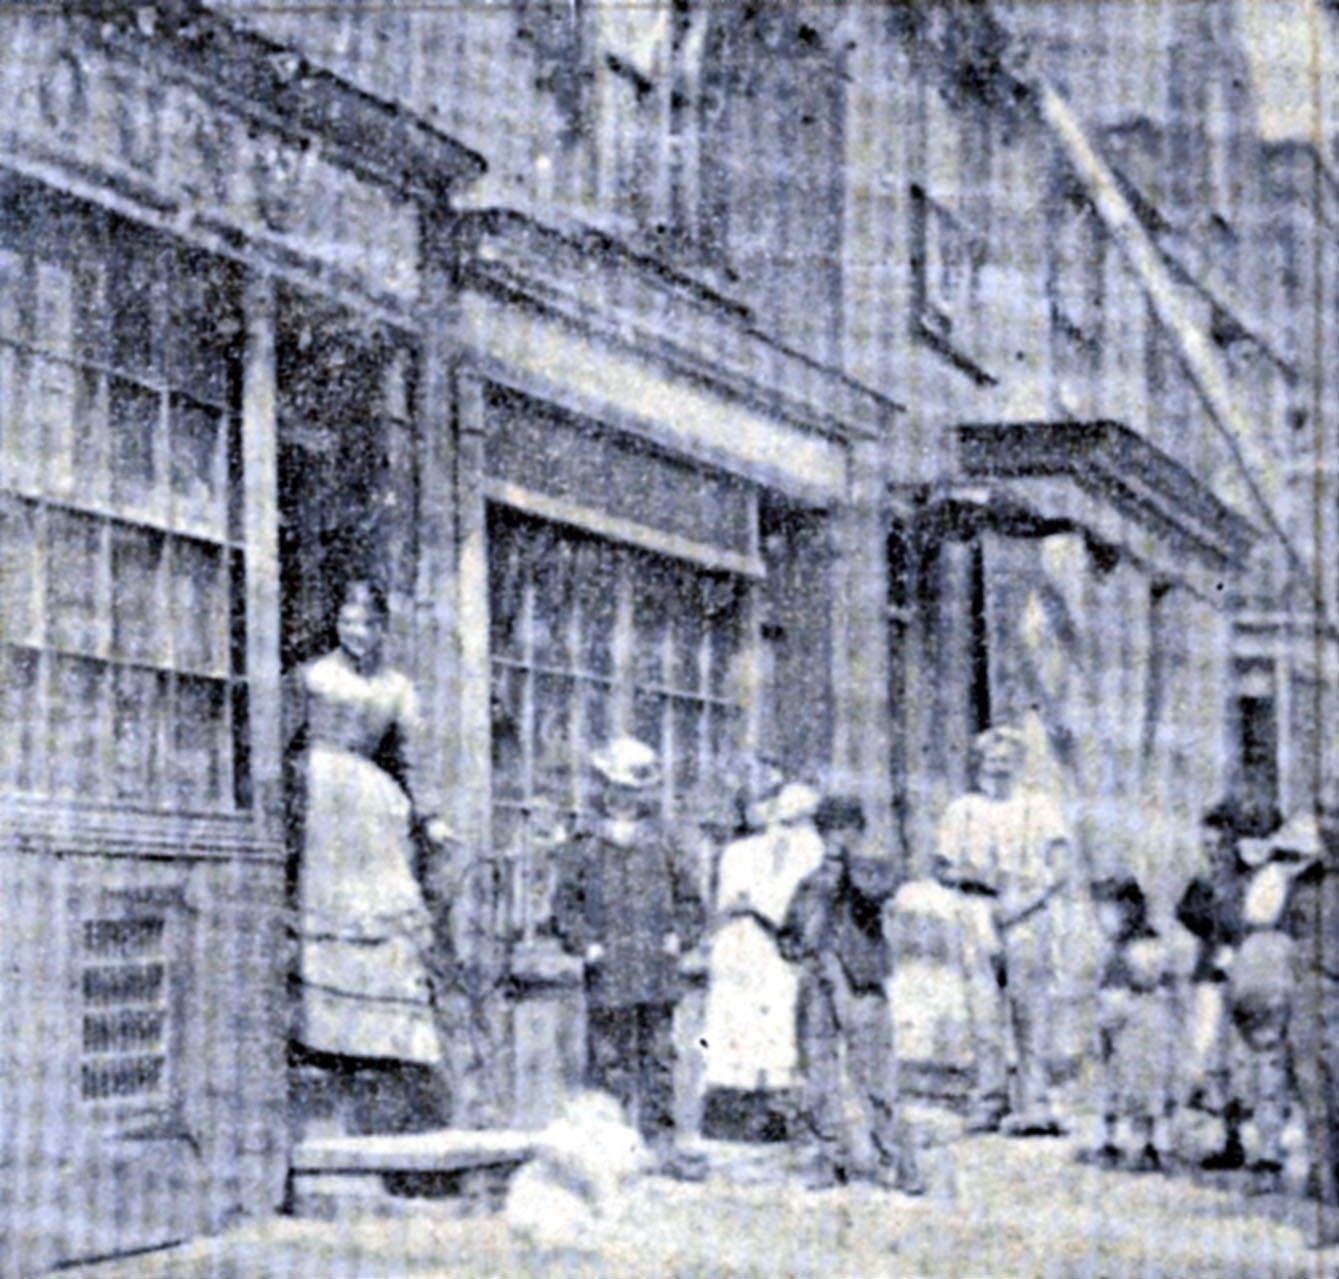 Group of people stood outside of a store with one in the doorway.